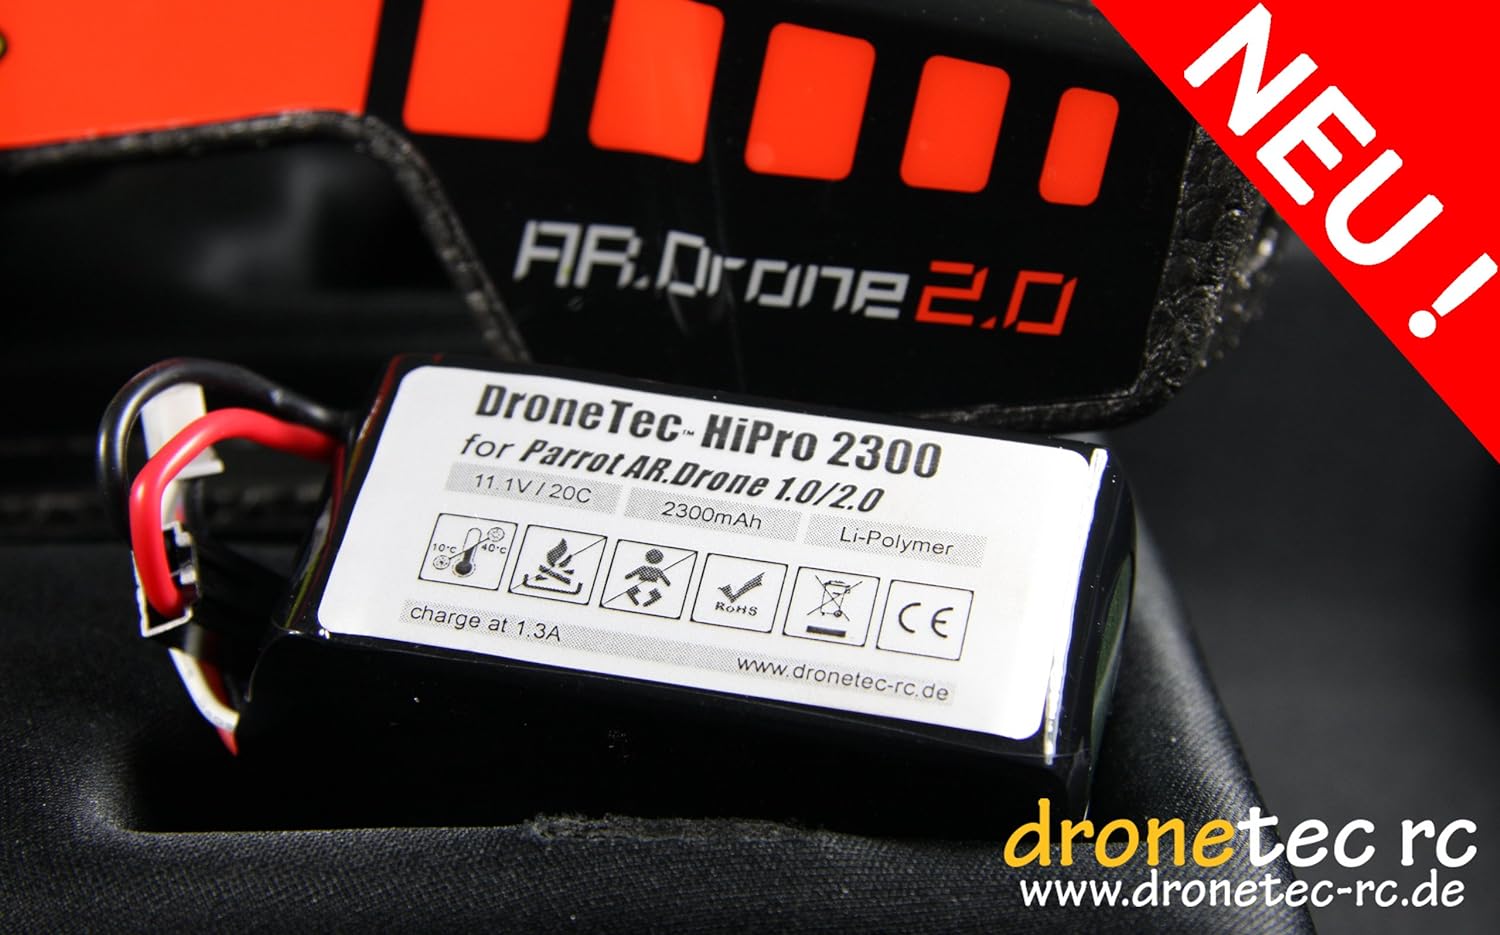 Parrot AR DRONE 2.0 / 1.0 * Power Tuning